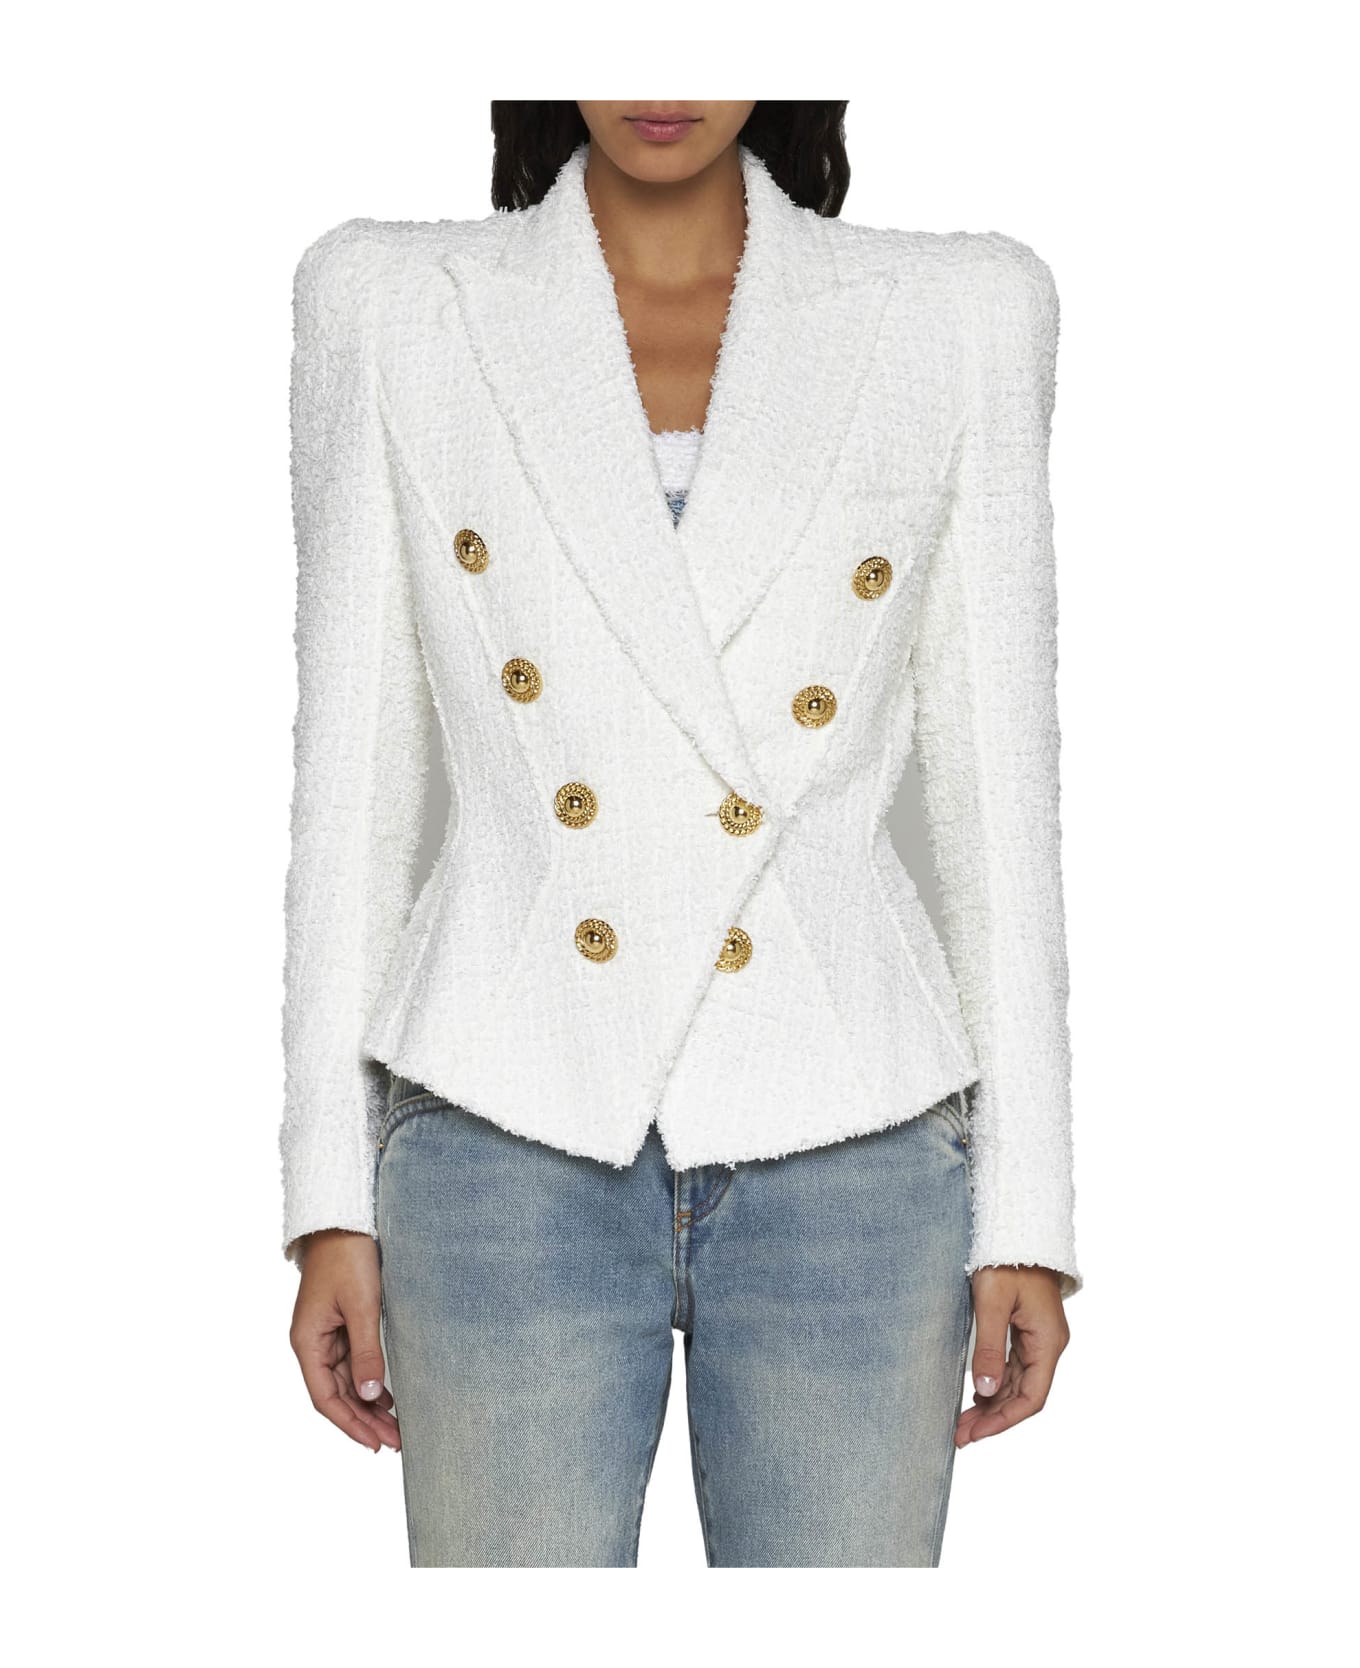 Balmain Double-breasted Tweed Blazer With Logo Buttons - Blanc ブレザー